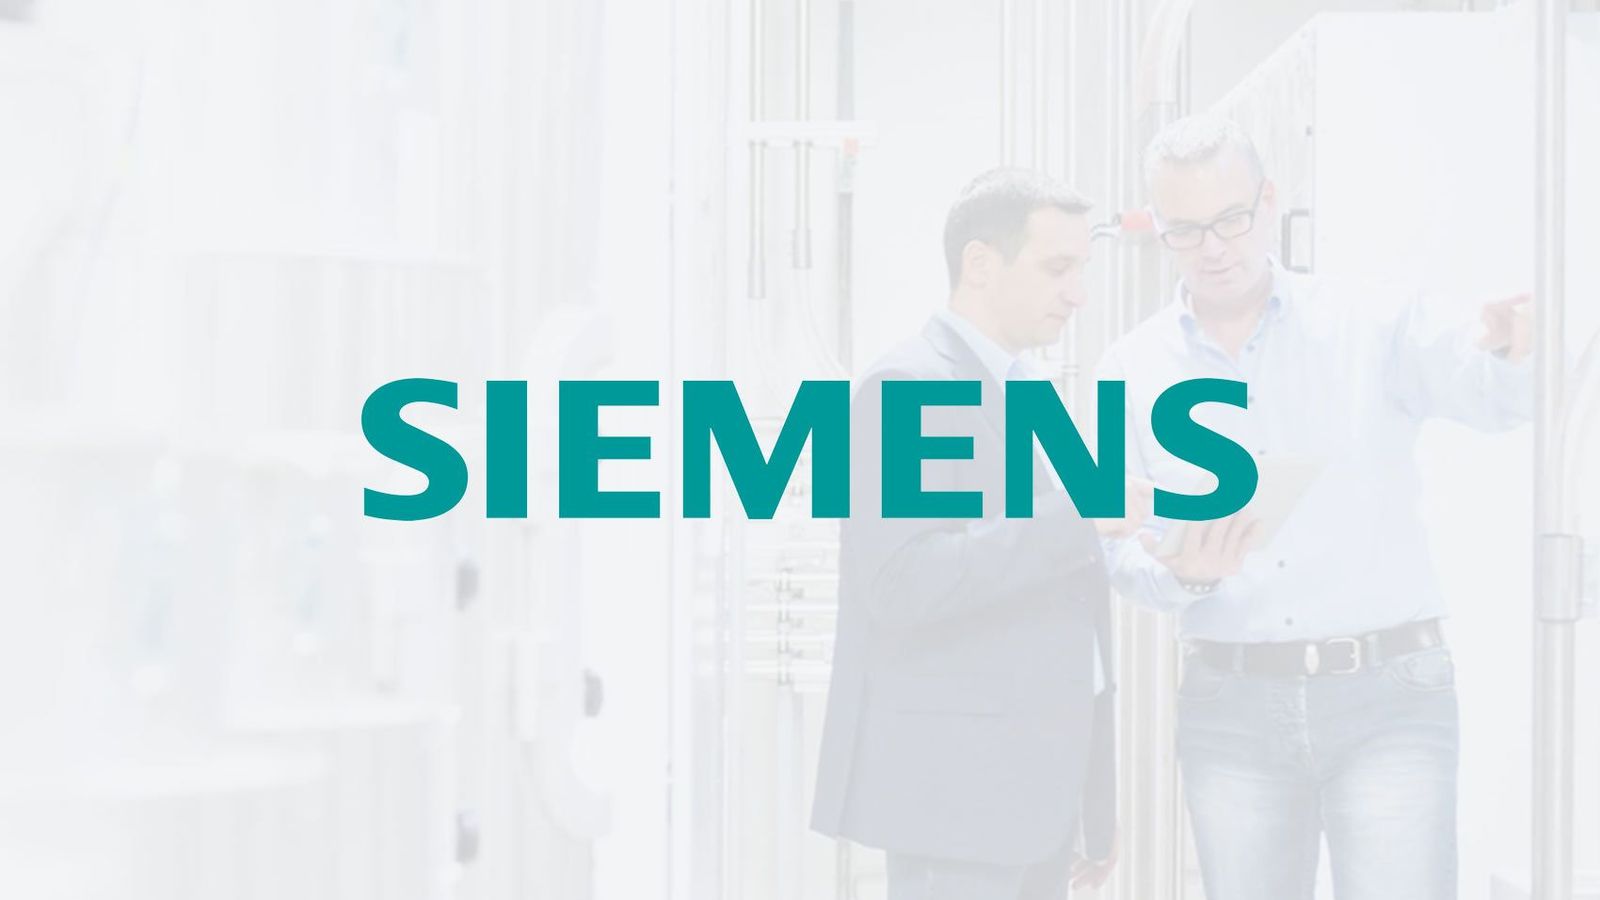 Siemens delivers modern learning experiences